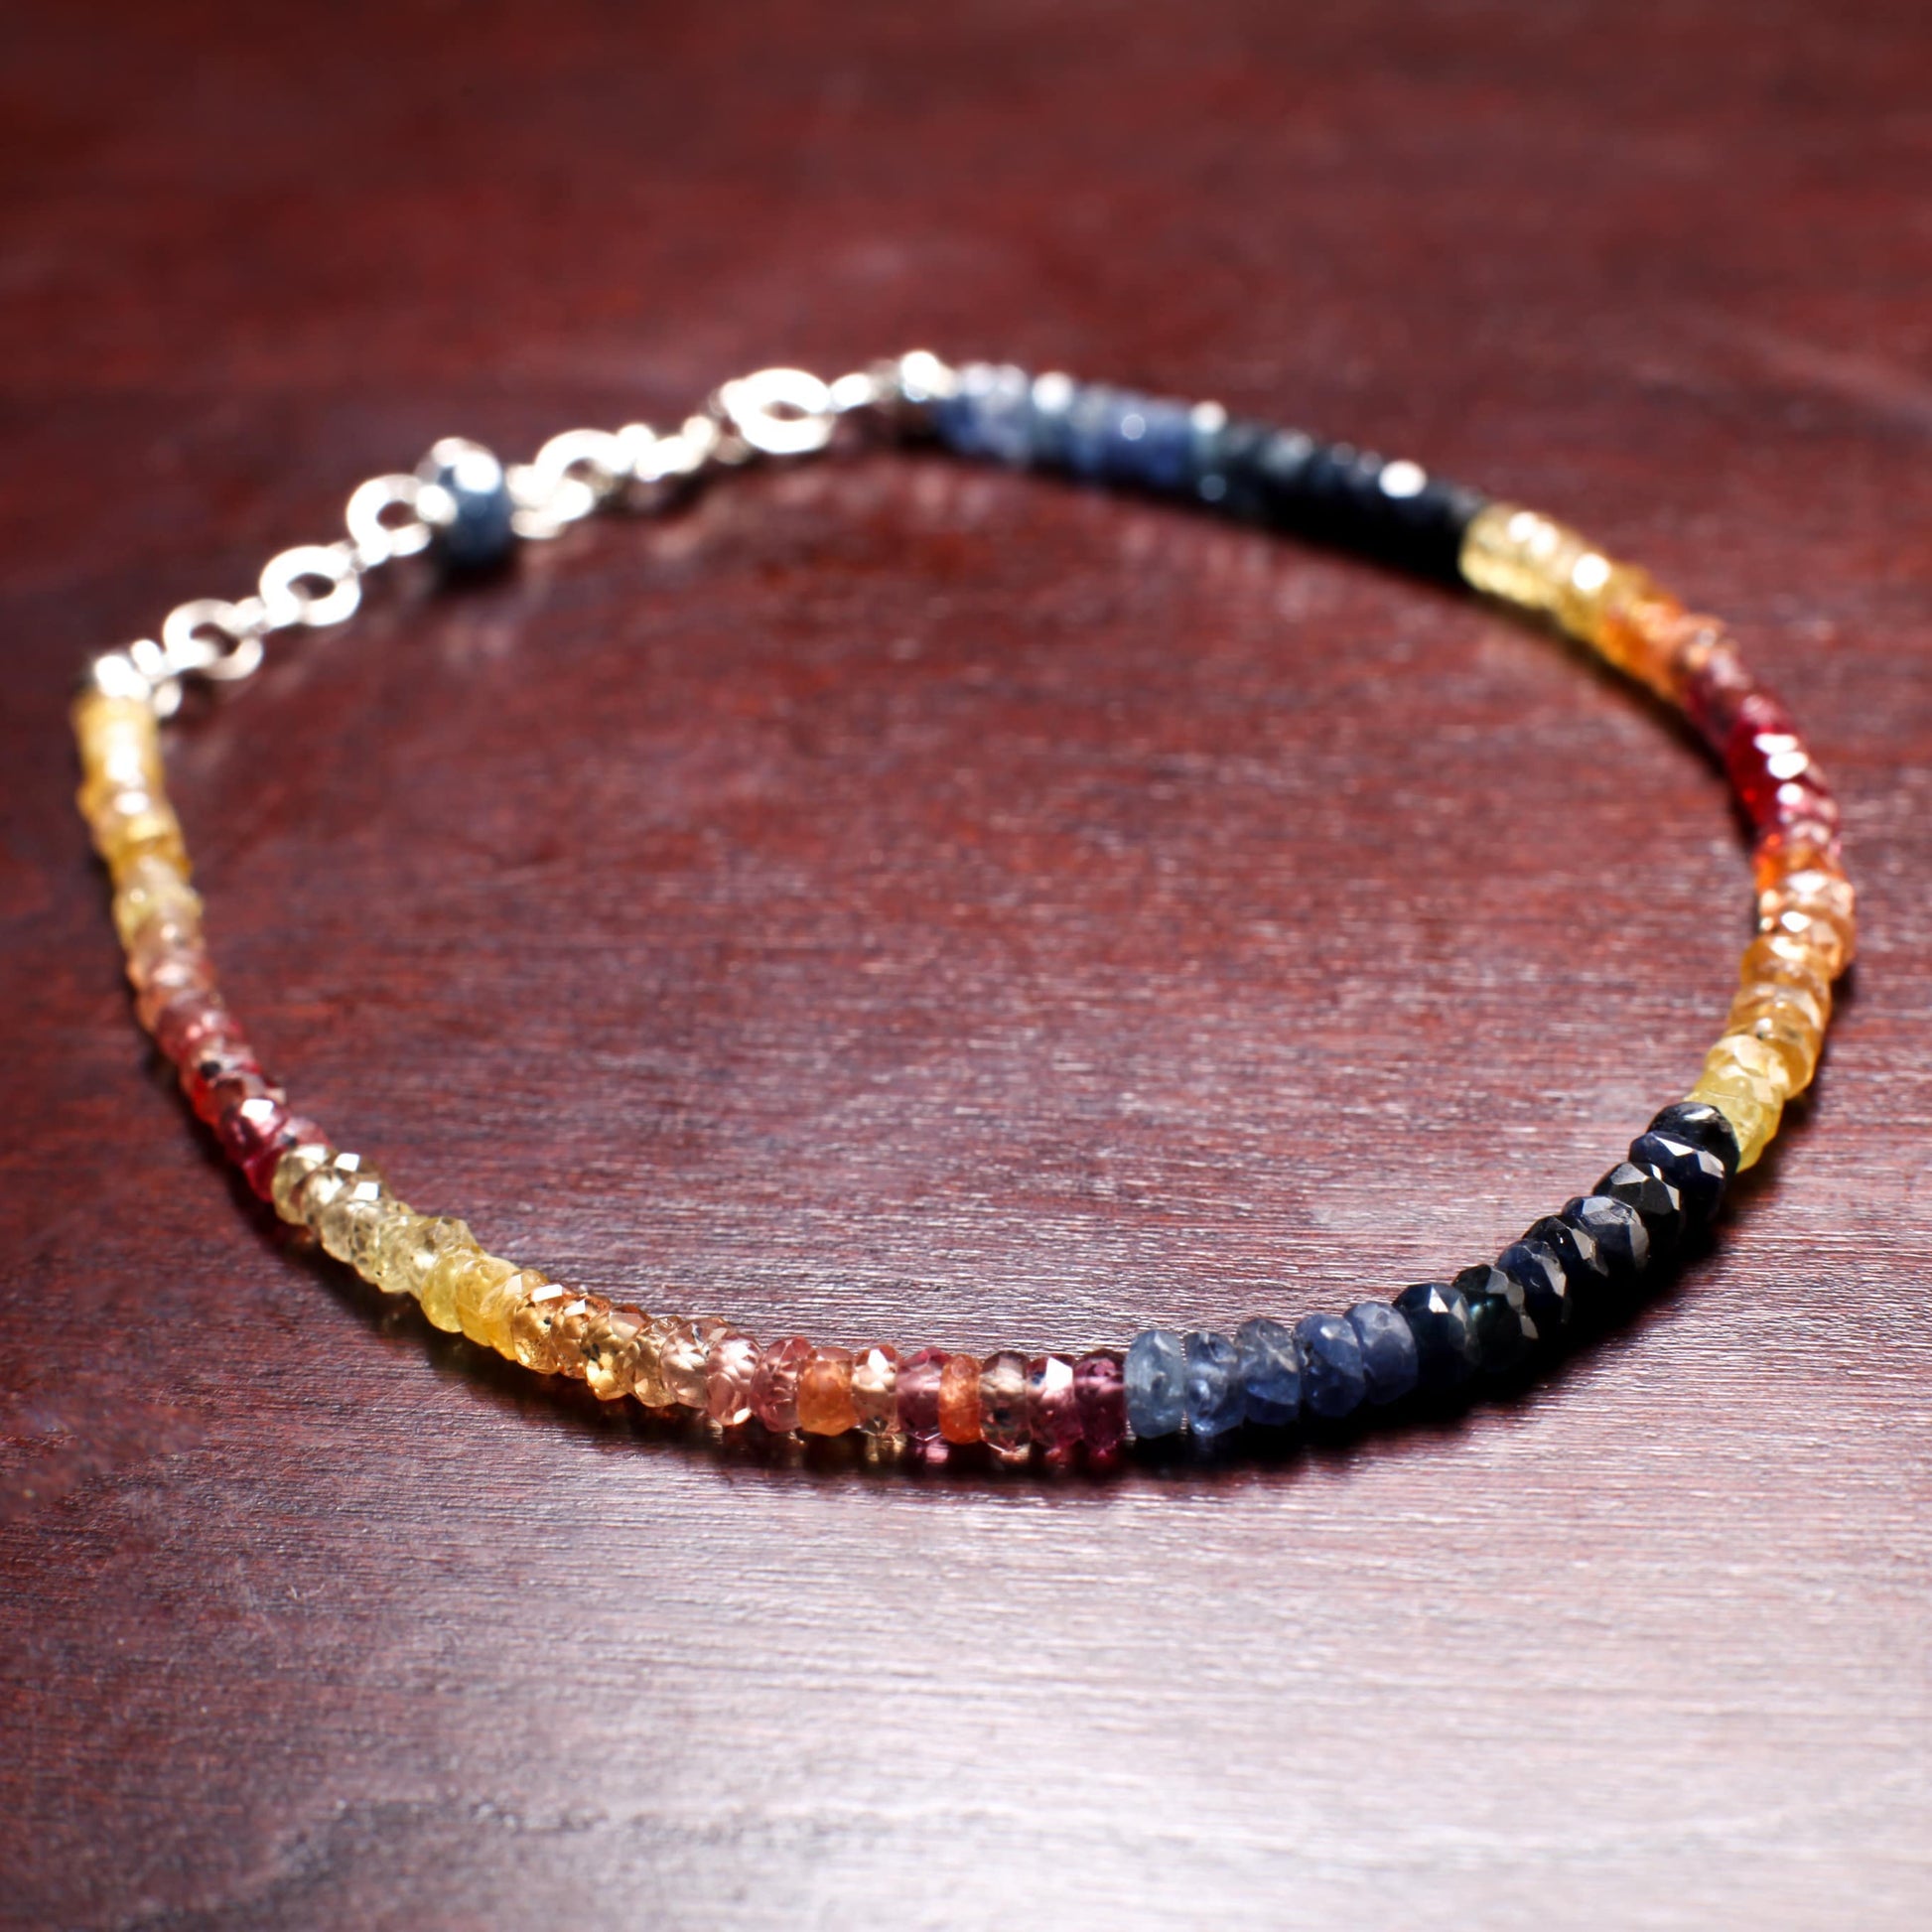 Natural Multi Sunset Sapphire Faceted 3mm Rondelle Gemstone Bracelet in 925 Sterling Silver or 14K Gold Filled Chain and Clasp, Gift for her